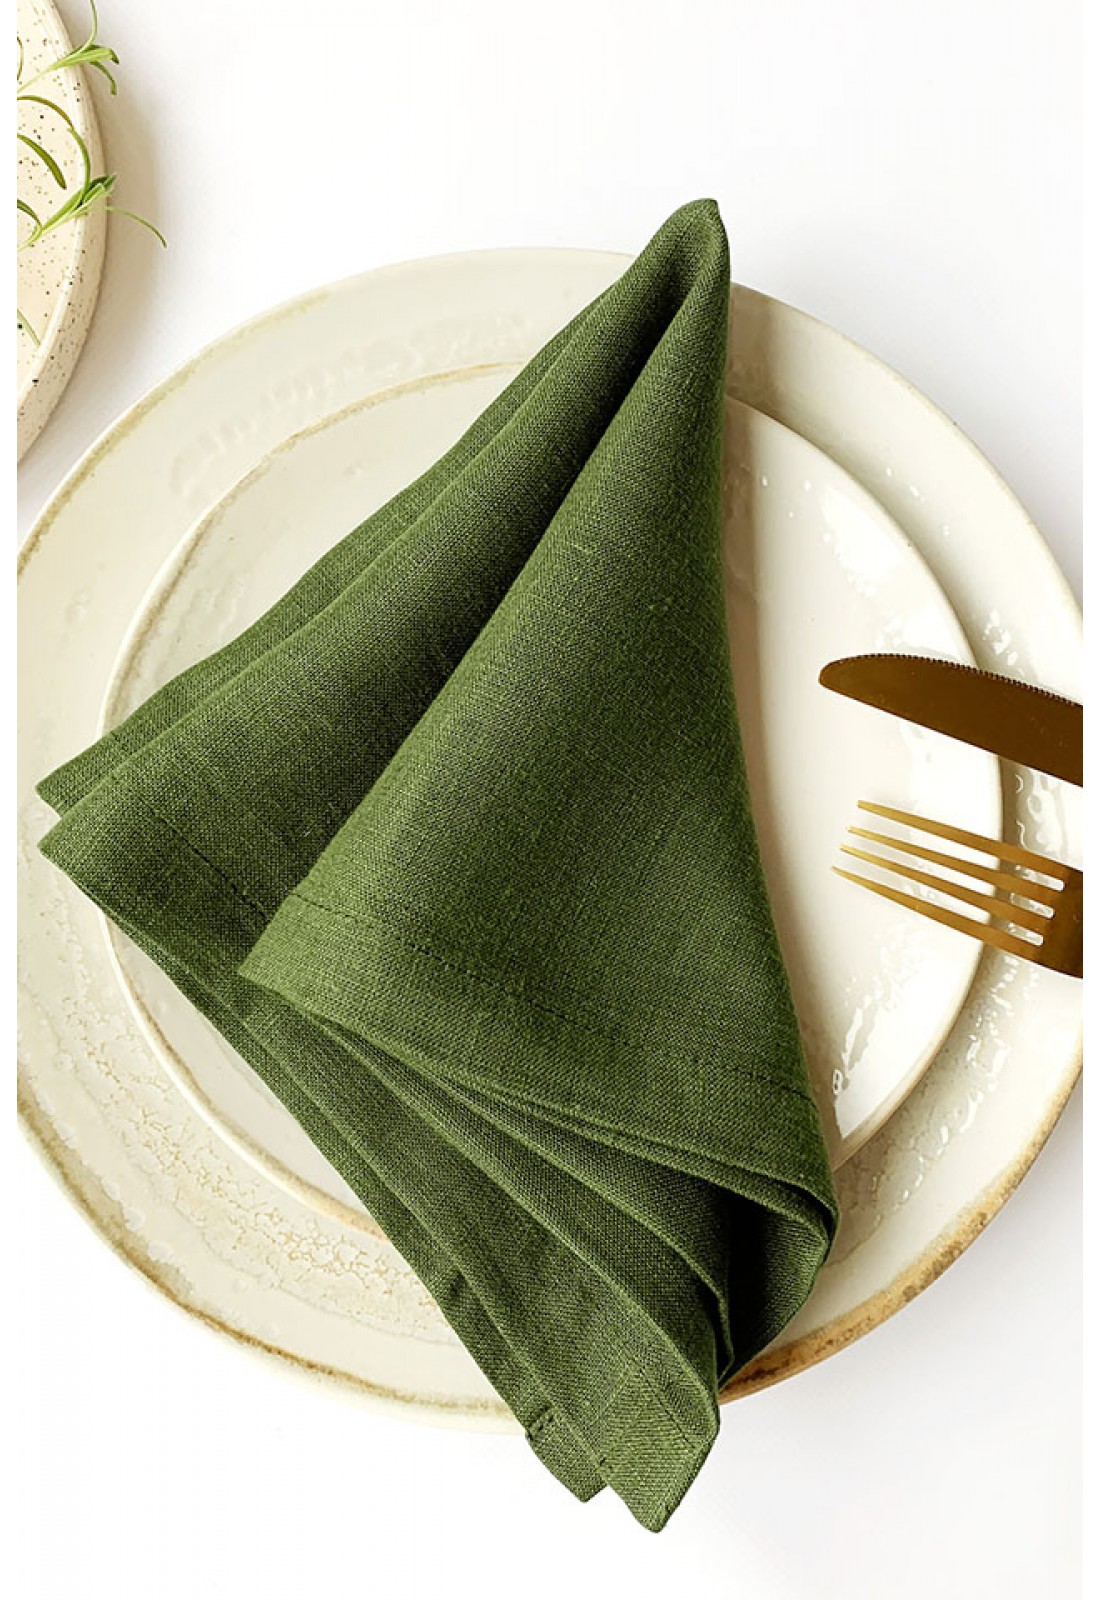 https://www.touchablelinen.com/image/cache/catalog/products/46/Linen-napkins-in-Moss-green-3-1100x1600.jpg